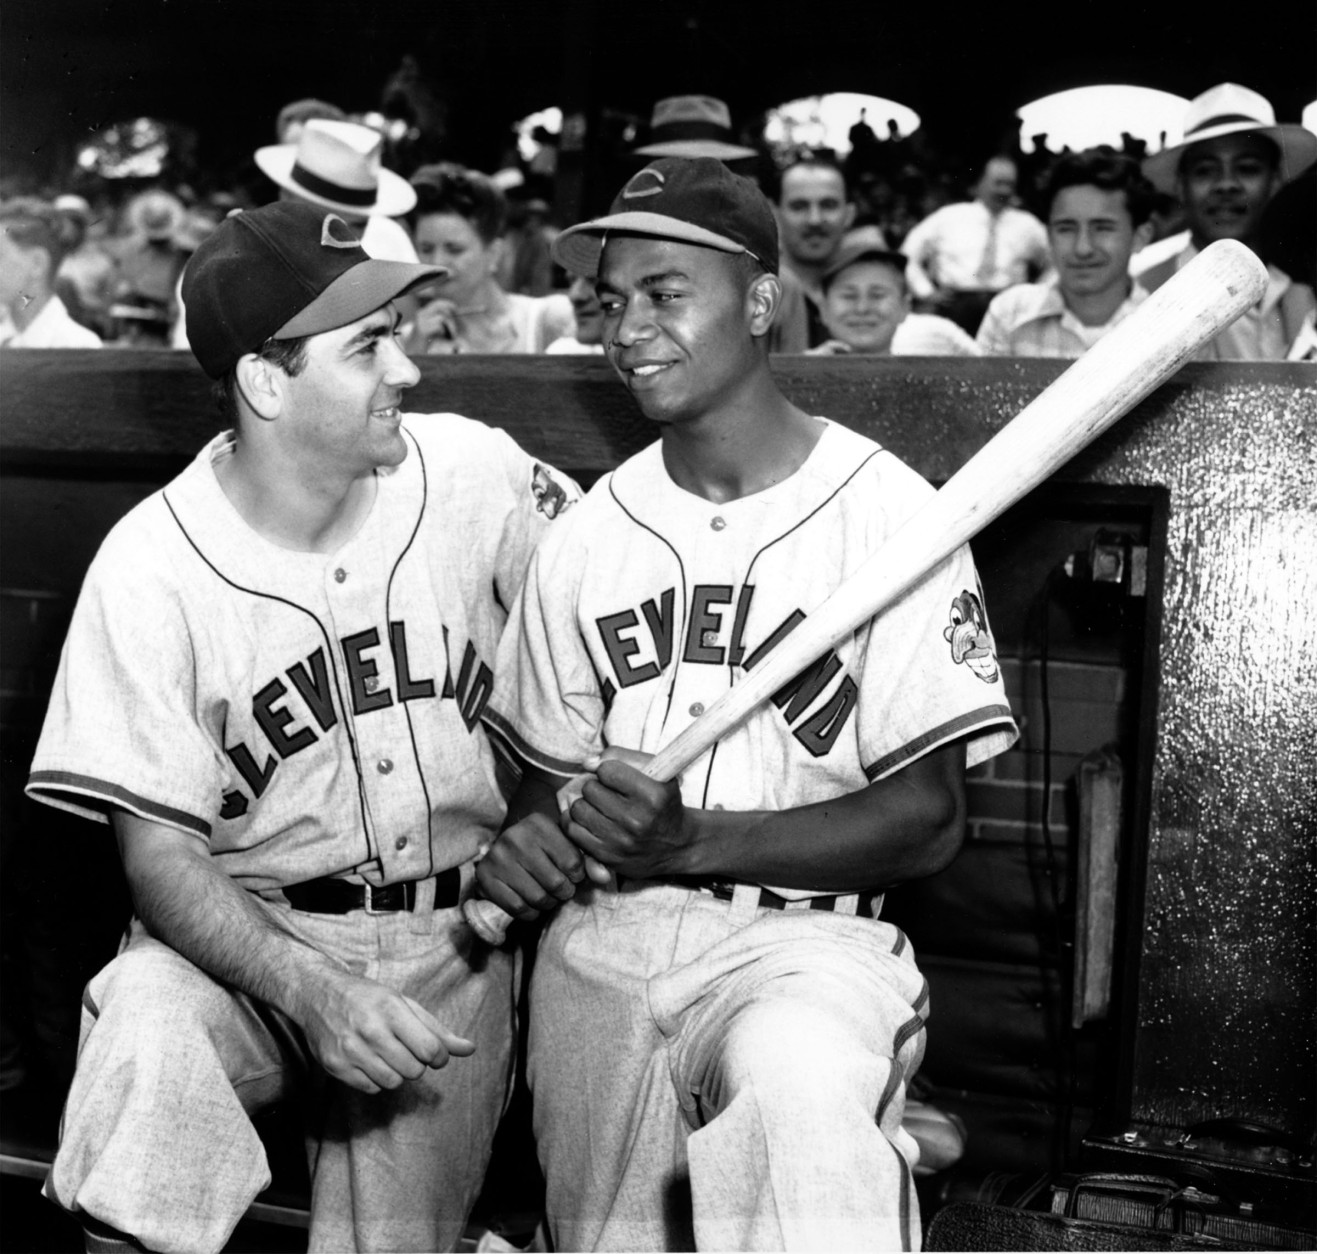 Manager Lou Boudreau and Larry Doby, first black player in the American League, stand in the dugout at Comiskey Park in Chicago, Ill., on July 5, 1947.  (AP Photo)